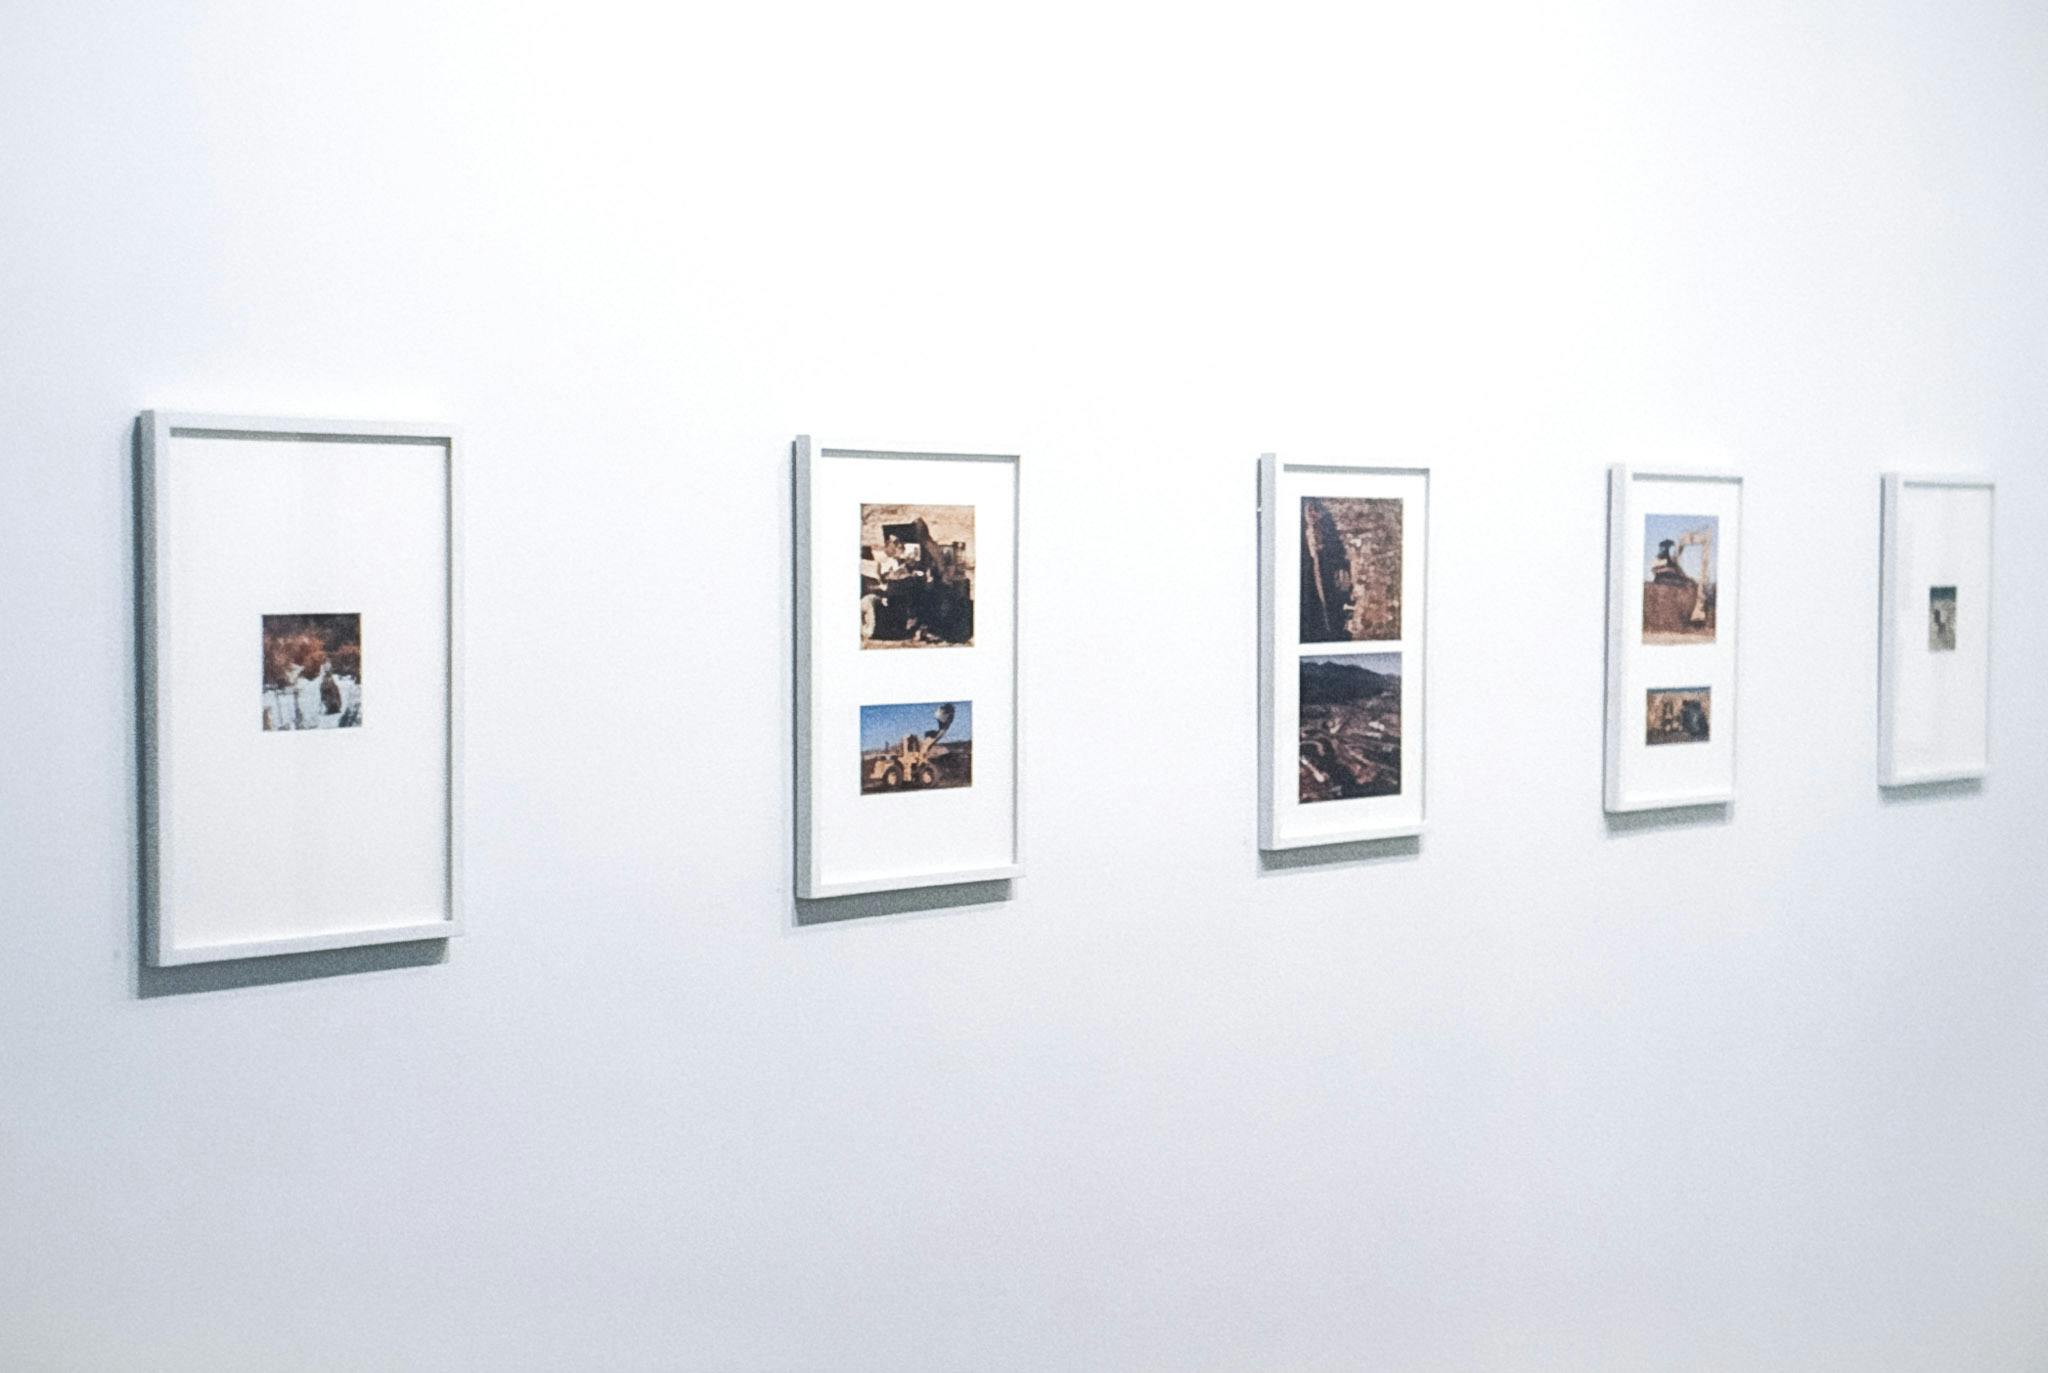 5 vertical, framed photographic works on a white wall. The three frames in the centre contain 2 photos each, all of construction sites. The two on the ends each have one small photo of a landscape. 